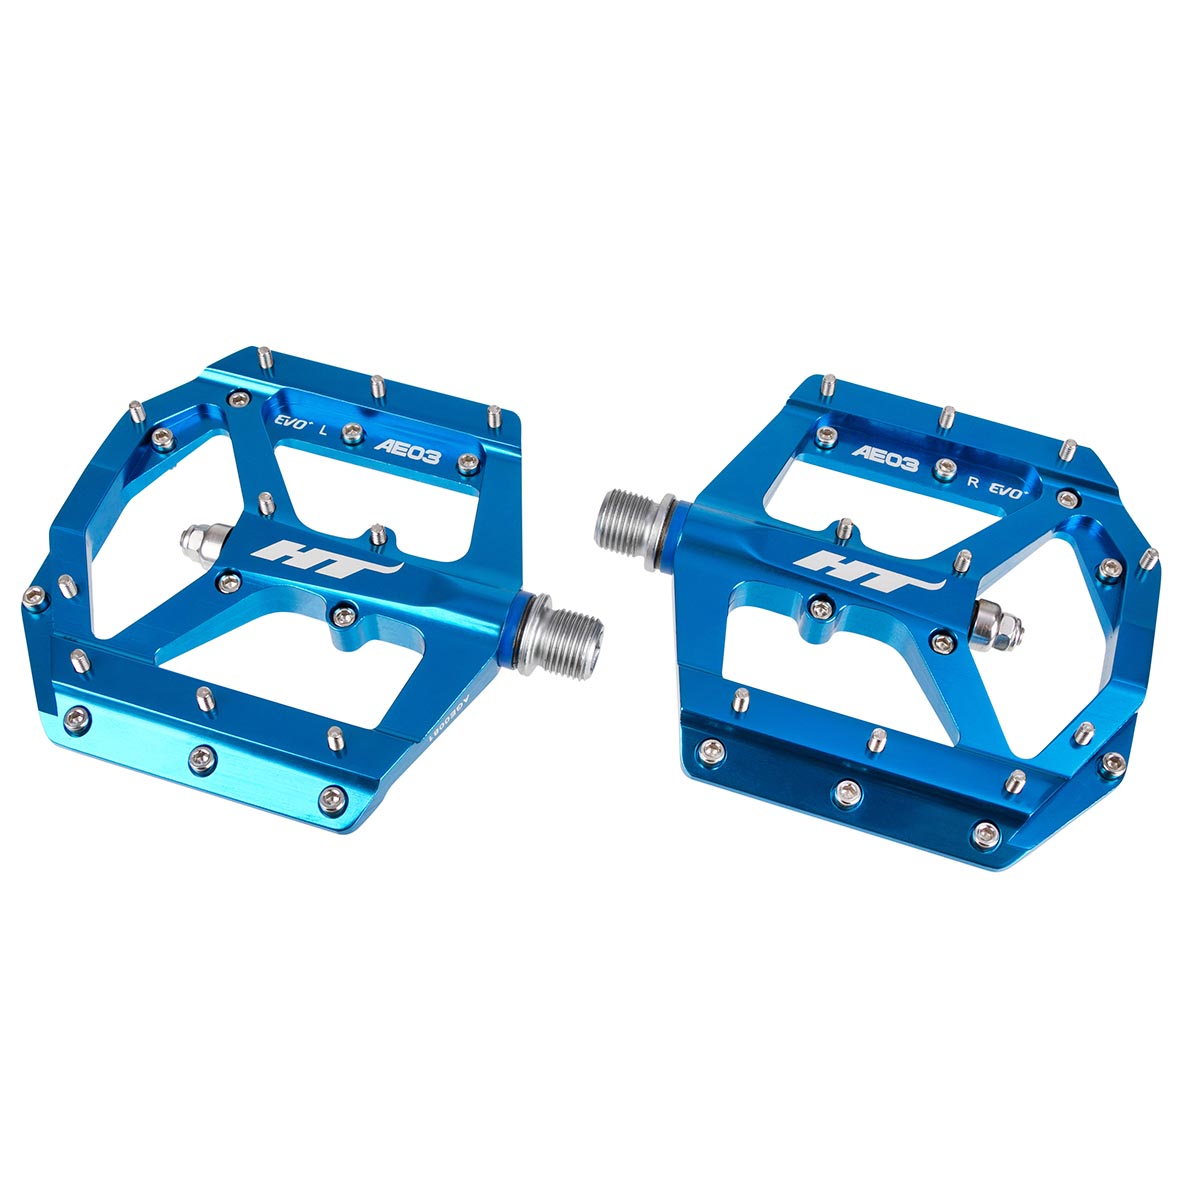 HT Components Pedals AE03 Marine Blue